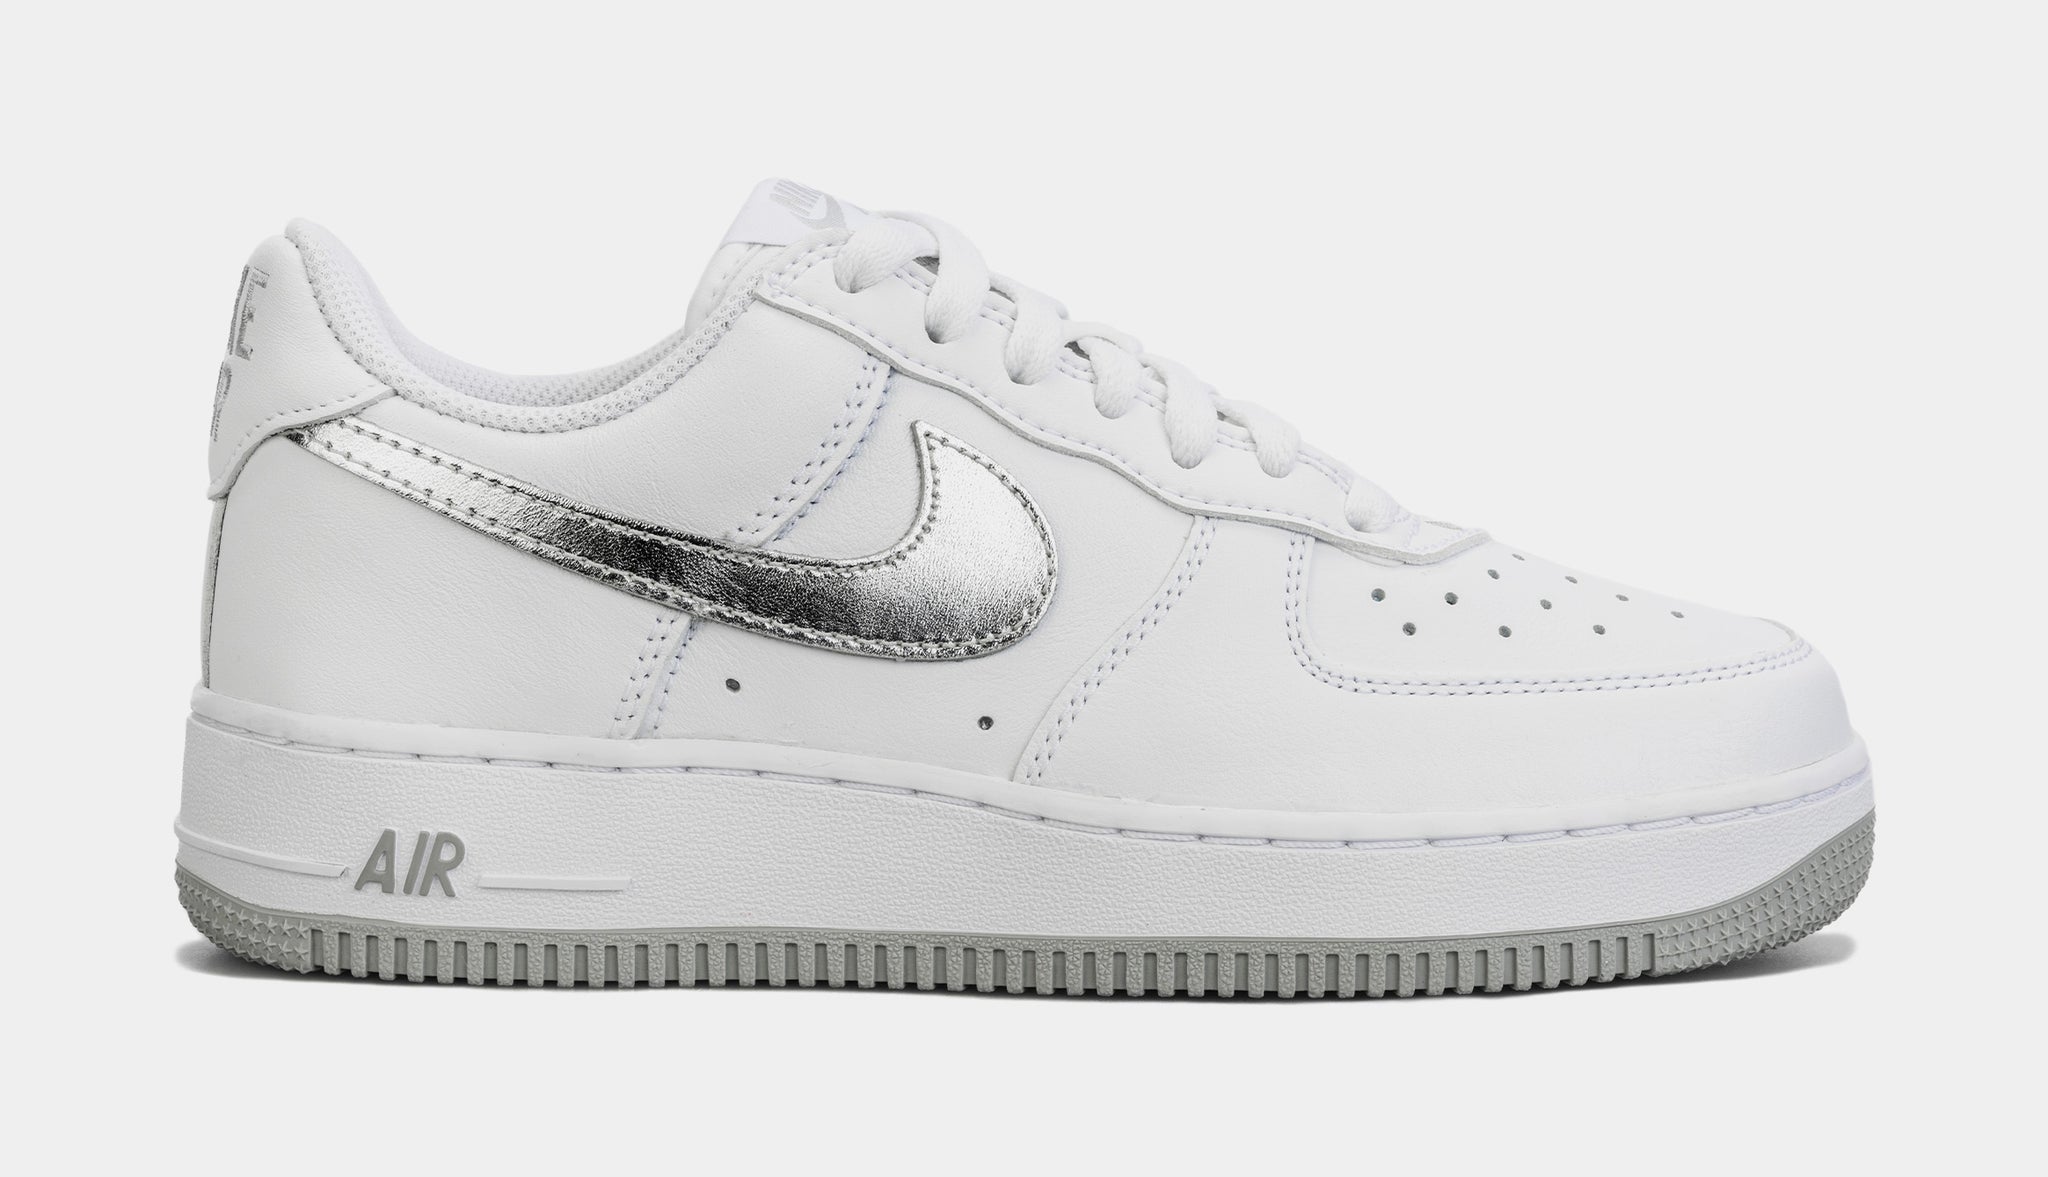 Grey Air Force 1 Shoes.